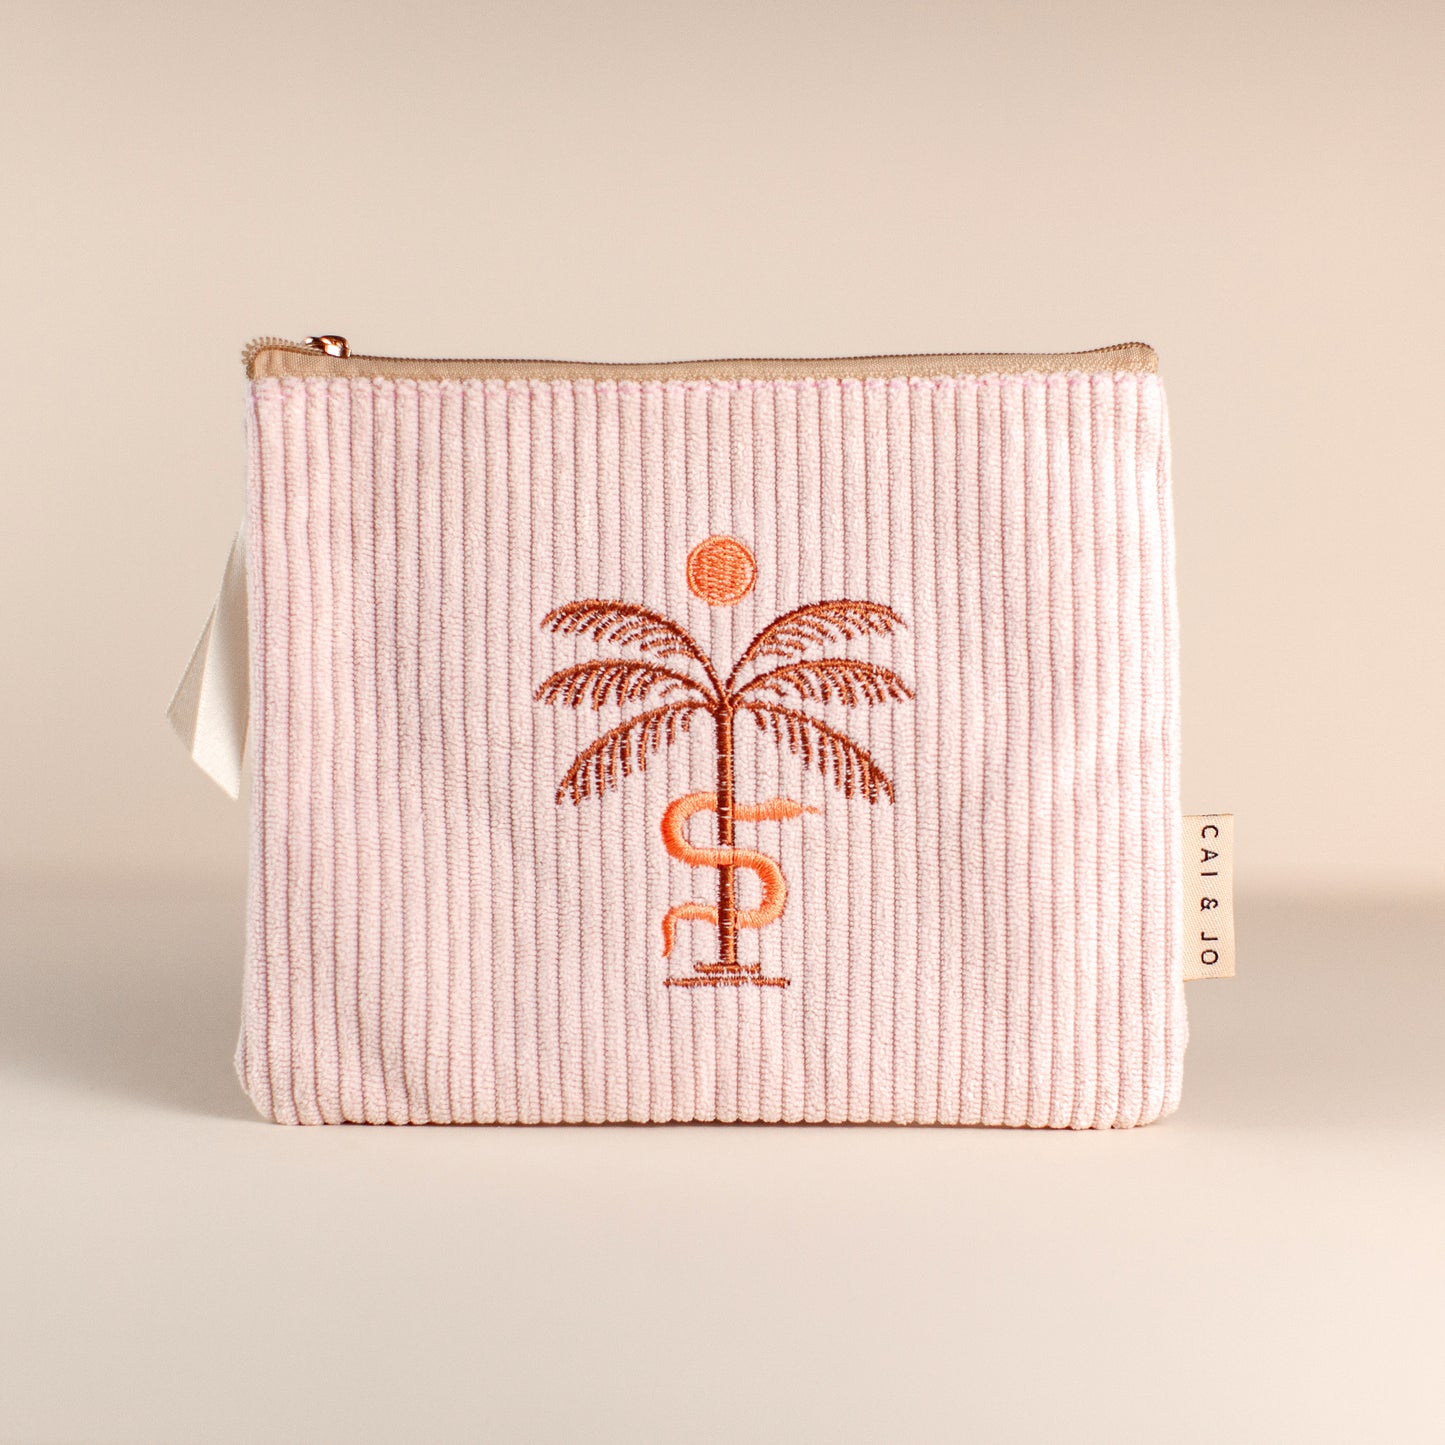 Palm pouch in pale pink